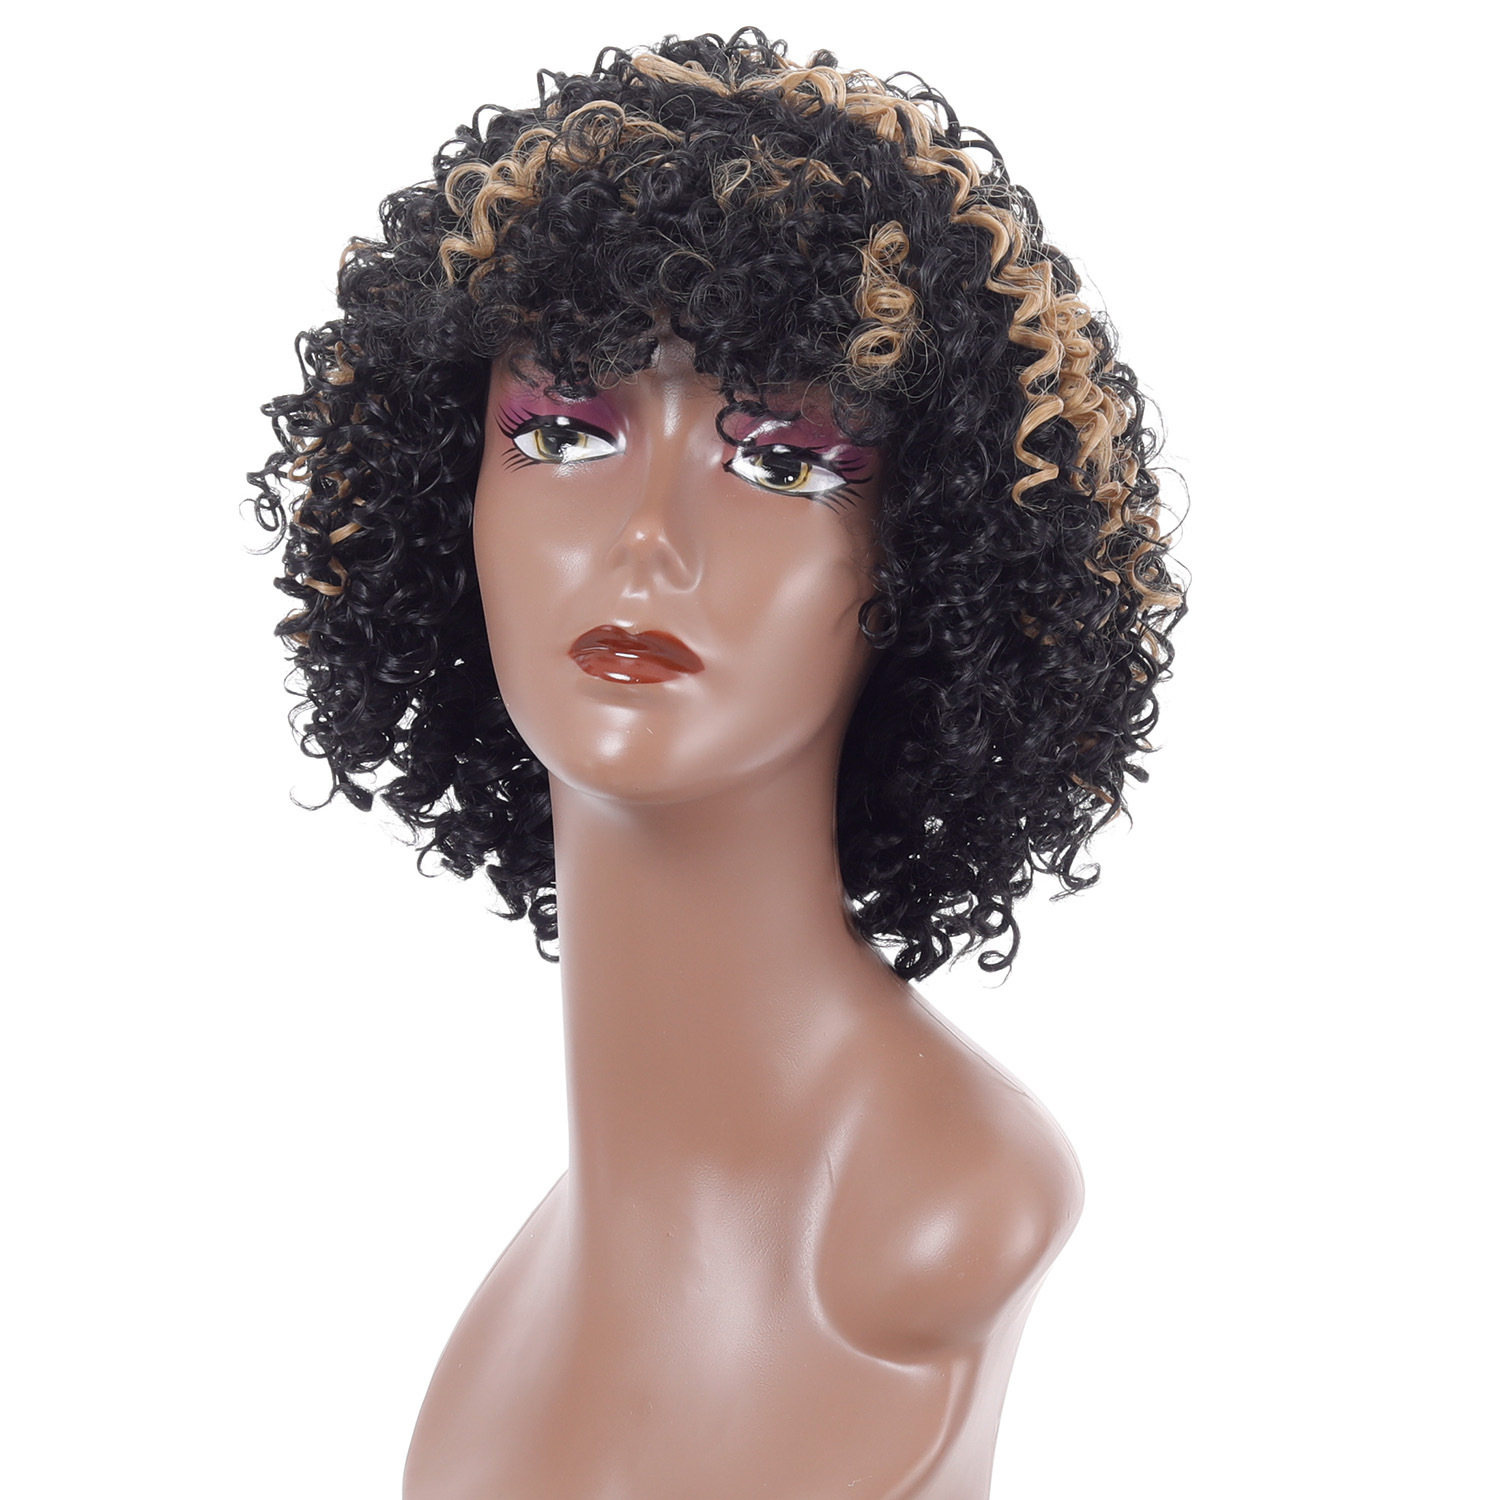 Fashionable short curly hair synthetic wig in black highlight blonde color, with afro small curly wig headgear